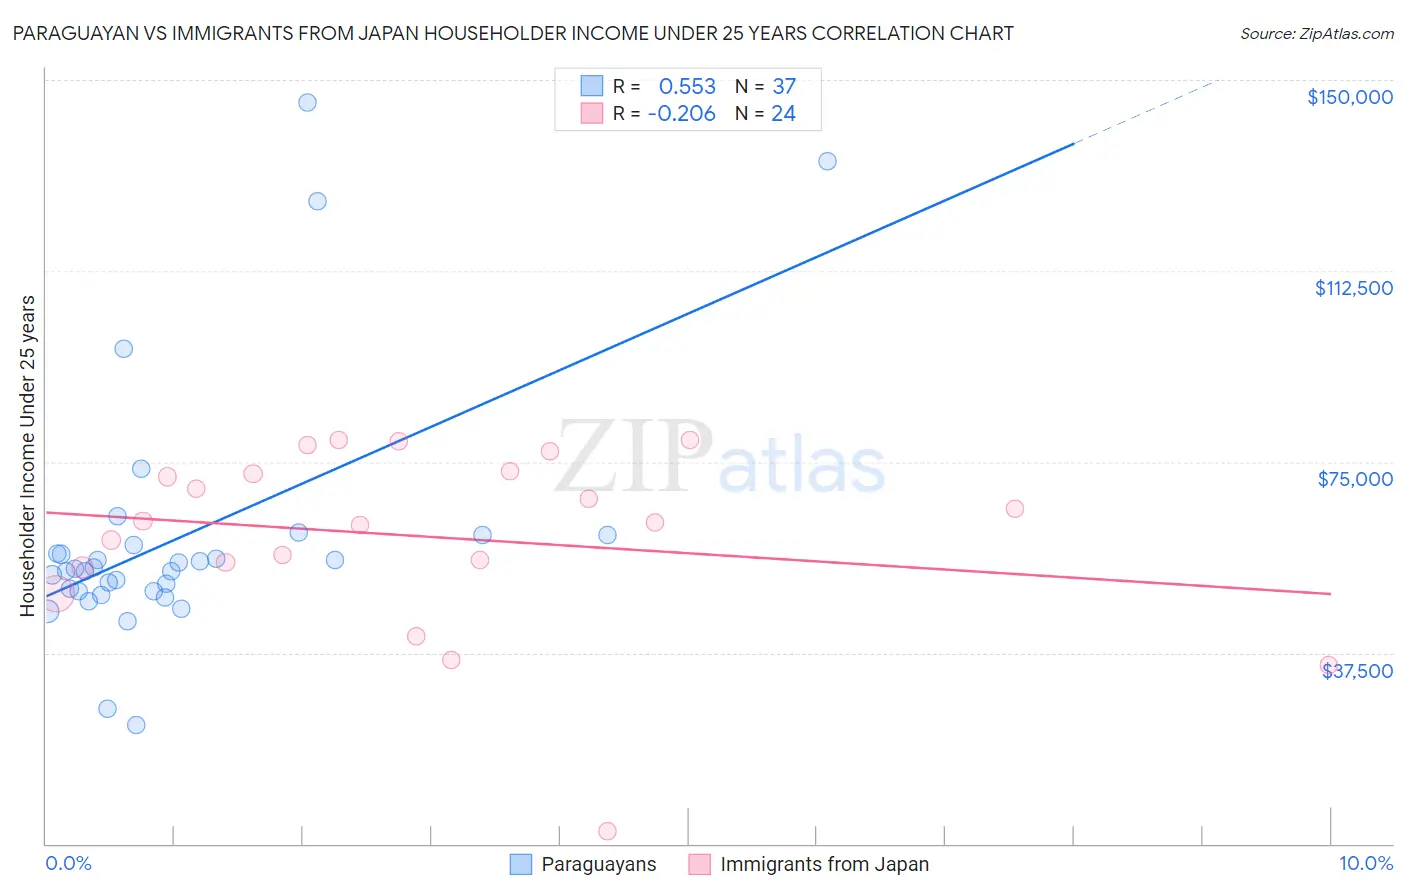 Paraguayan vs Immigrants from Japan Householder Income Under 25 years